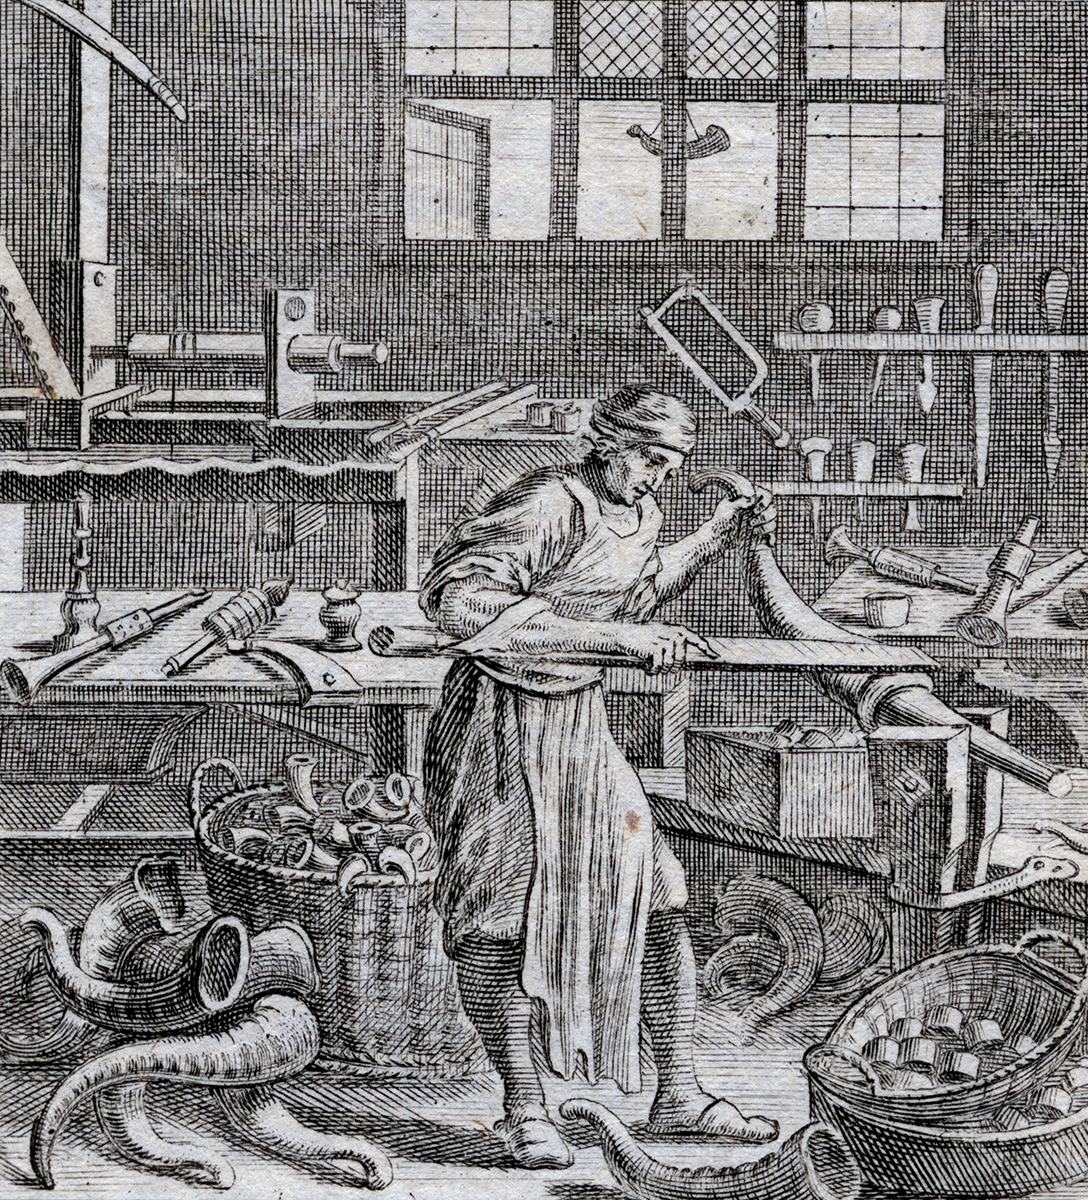 Horners used vast quantities of horns to produce a wide variety of finished goods. This Germanic engraving from the late 17th century illustrates tools and techniques that would have been familiar to many American craftsmen. Private collection.